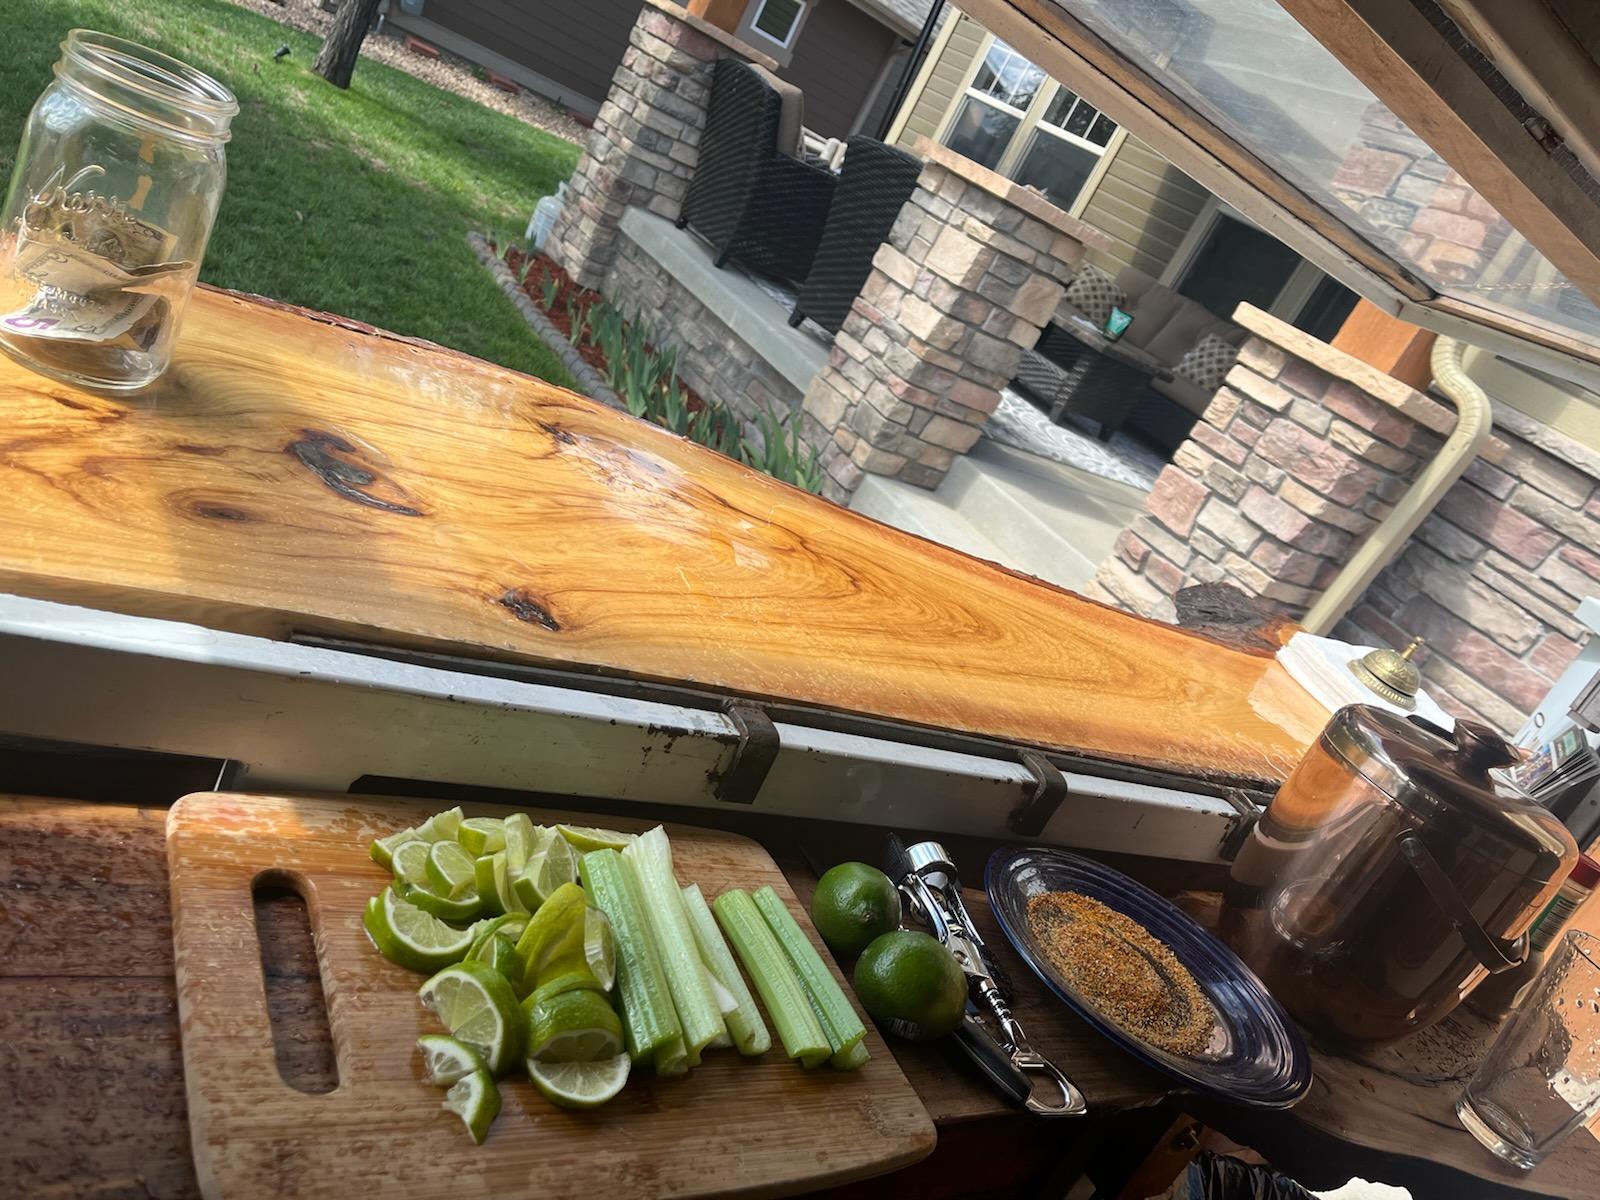 A bottle opener and lime and celery garnishes are displayed on the bar top inside the On The Rocks mobile bar trailer.